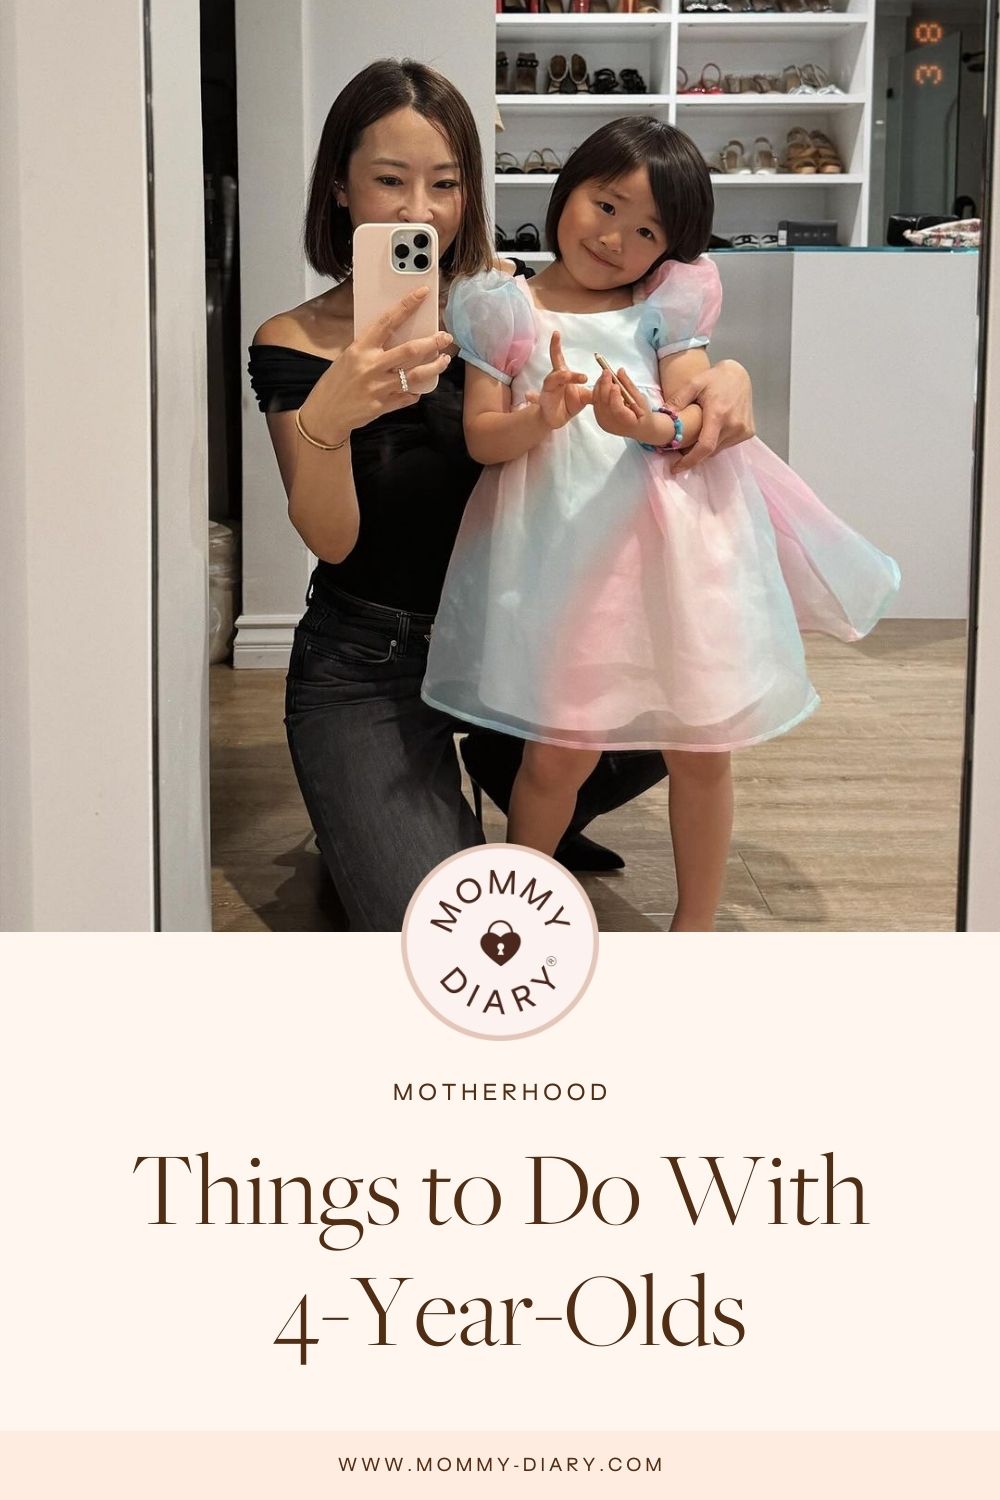 Things to Do With 4-Year-Olds